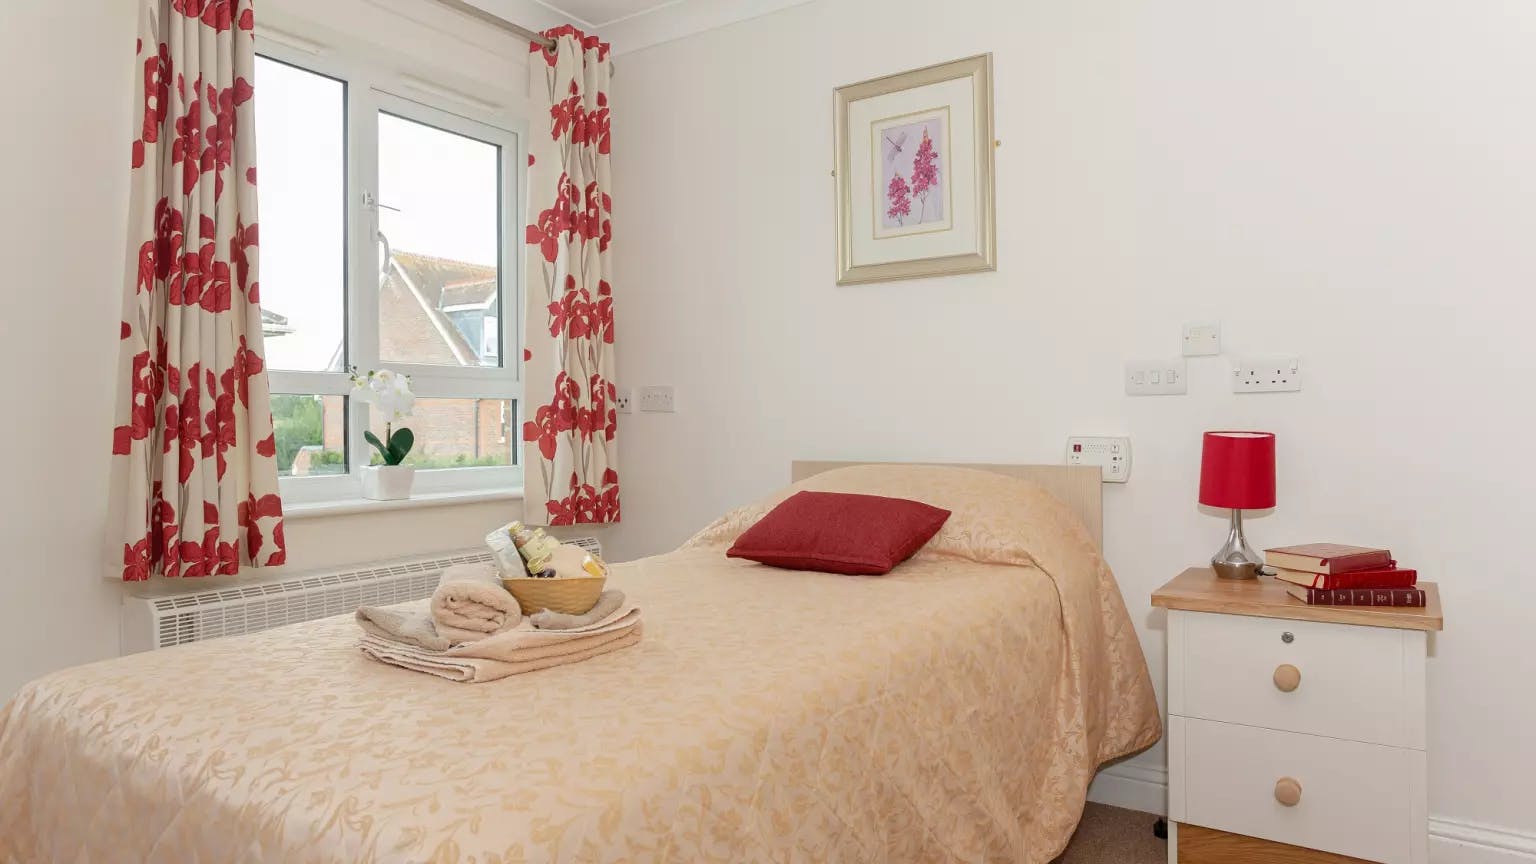 Bedroom of Willow Court care home in Harpenden, Hertfordshire